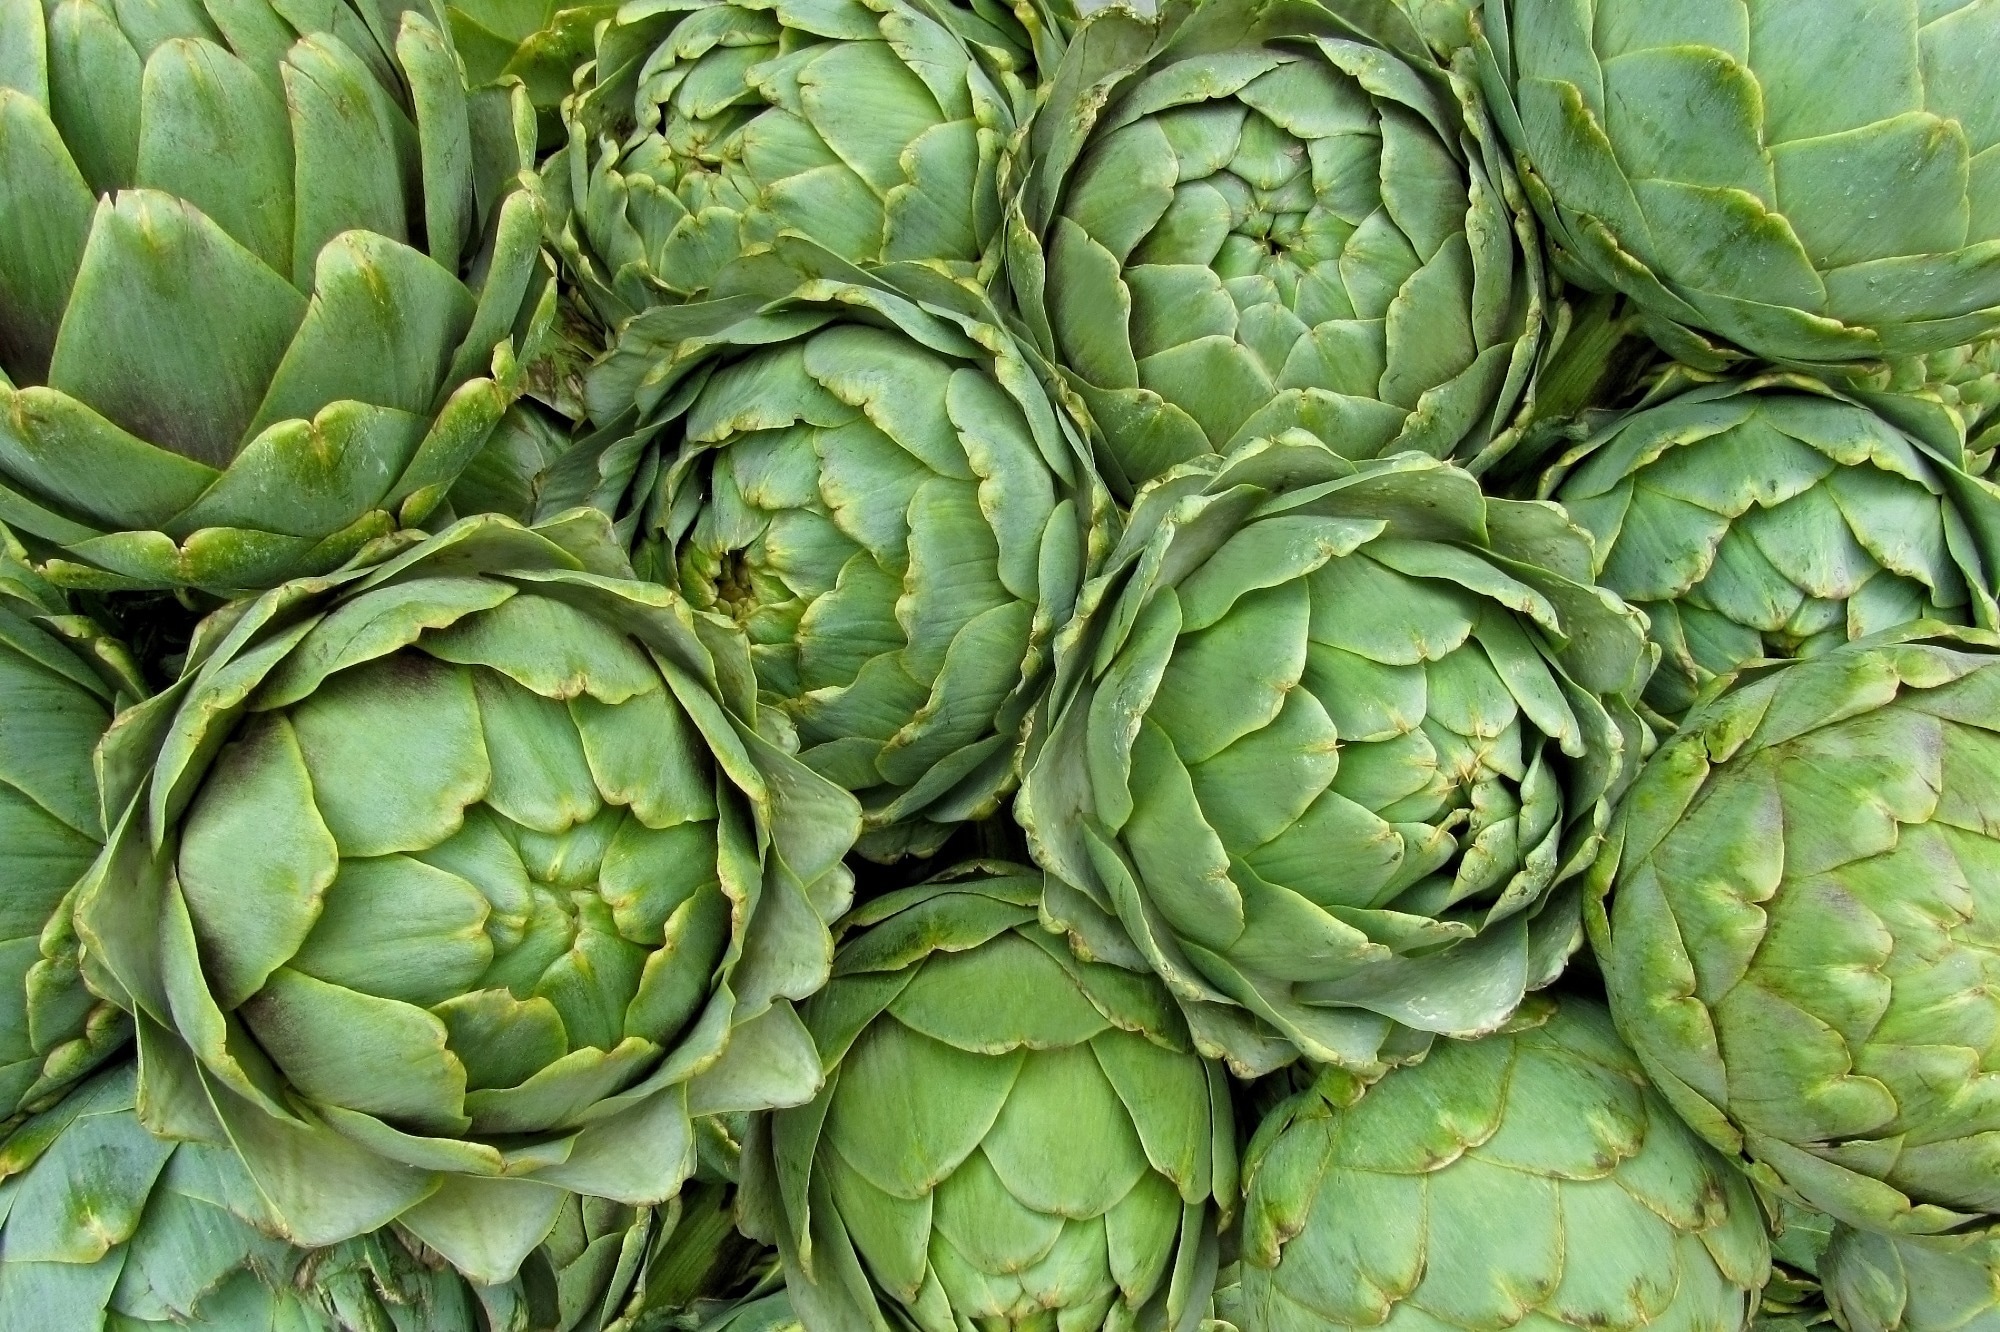 Study: An Overview of the Versatility of the Parts of the Globe Artichoke (Cynara scolymus L.), Its By-Products and Dietary Supplements. Image Credit: Ev Thomas/Shutterstock.com